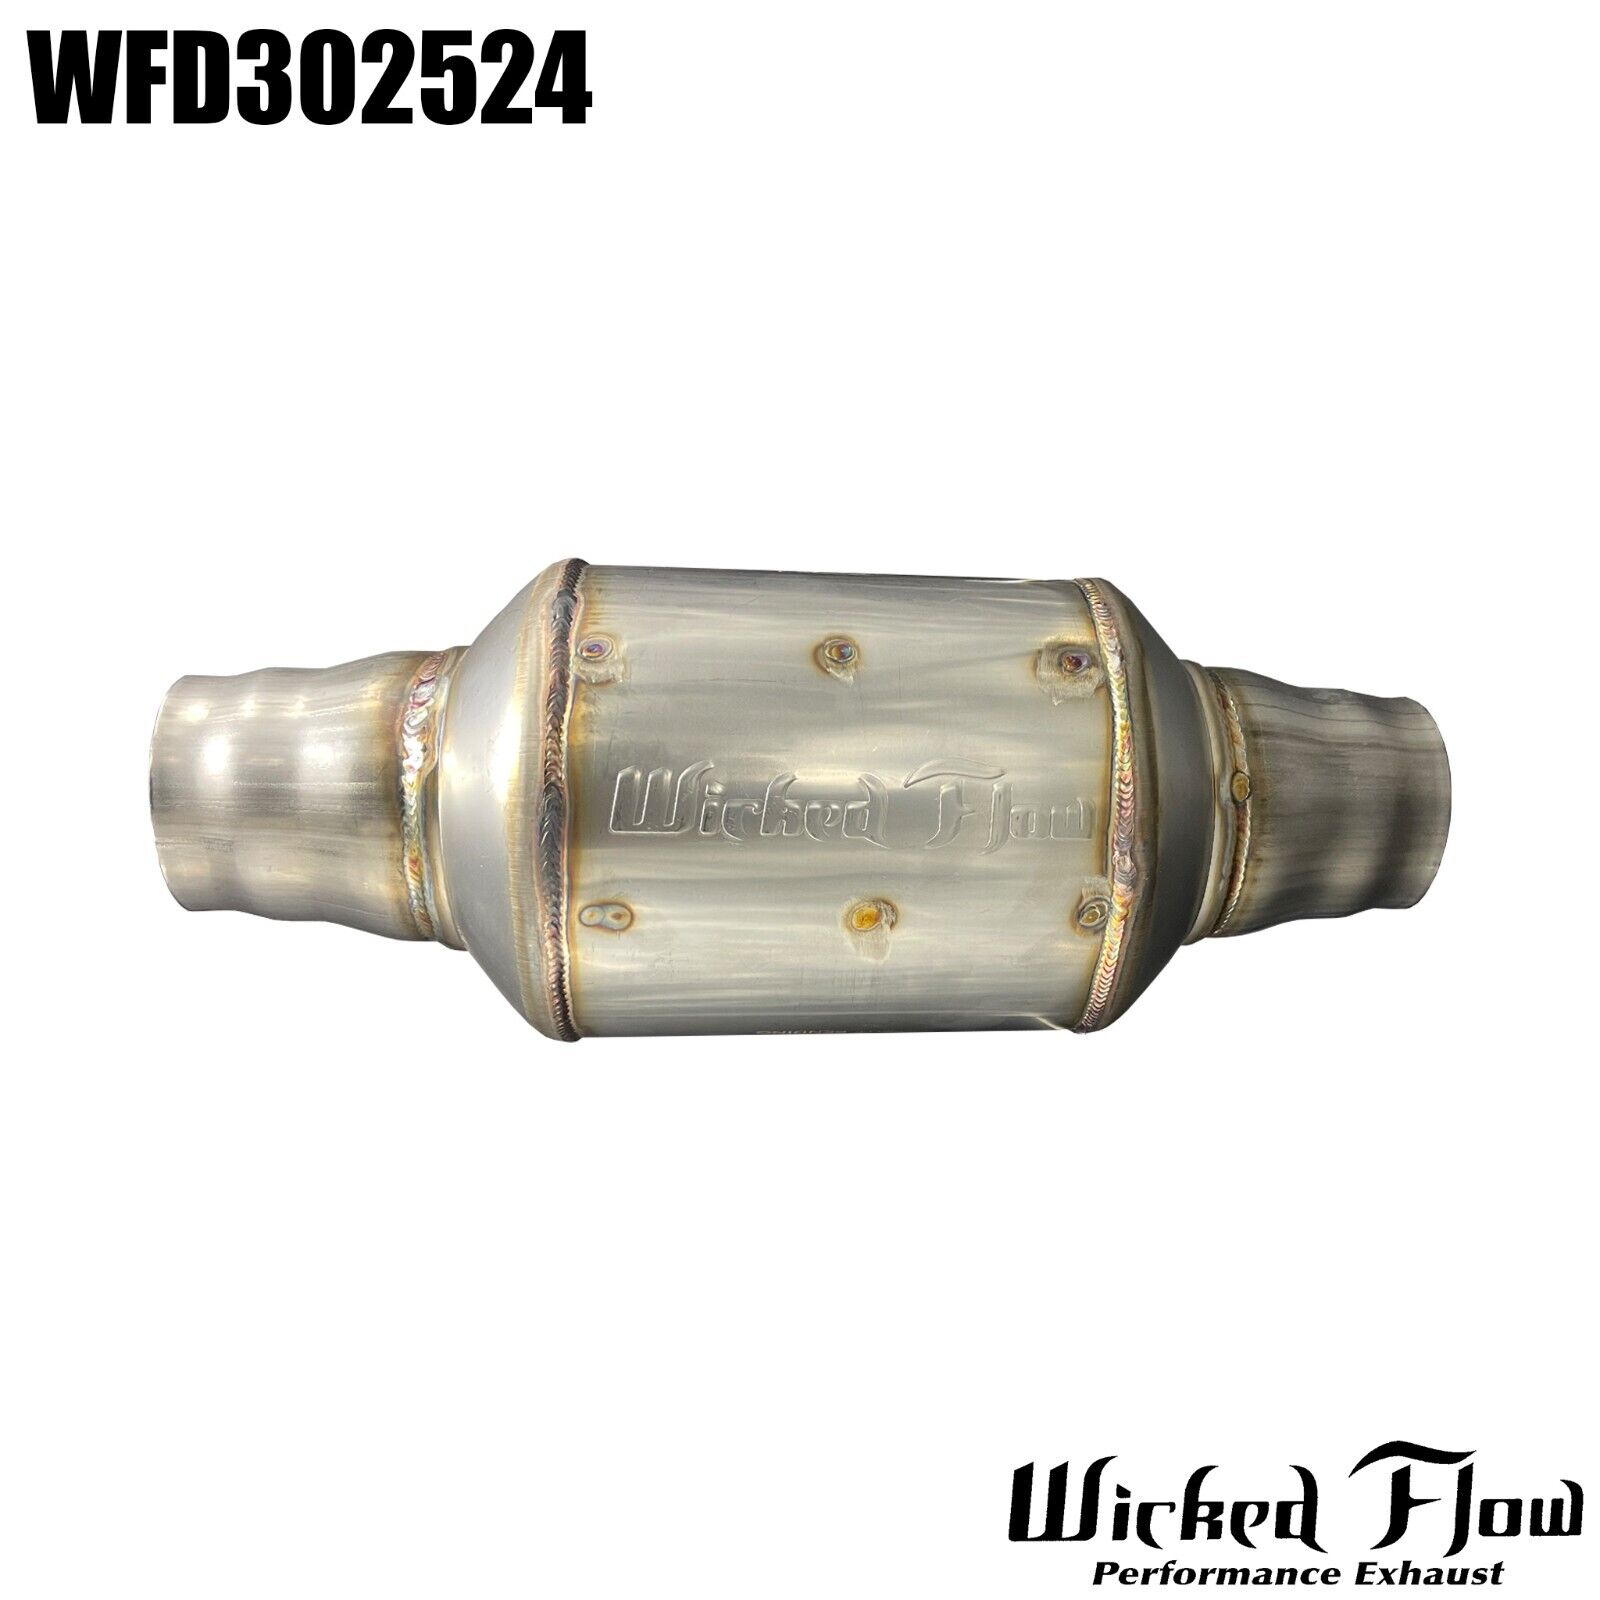 WFD302524 - WickedFlow Demon Muffler Step-Inlet/Outlet - REVERSIBLE